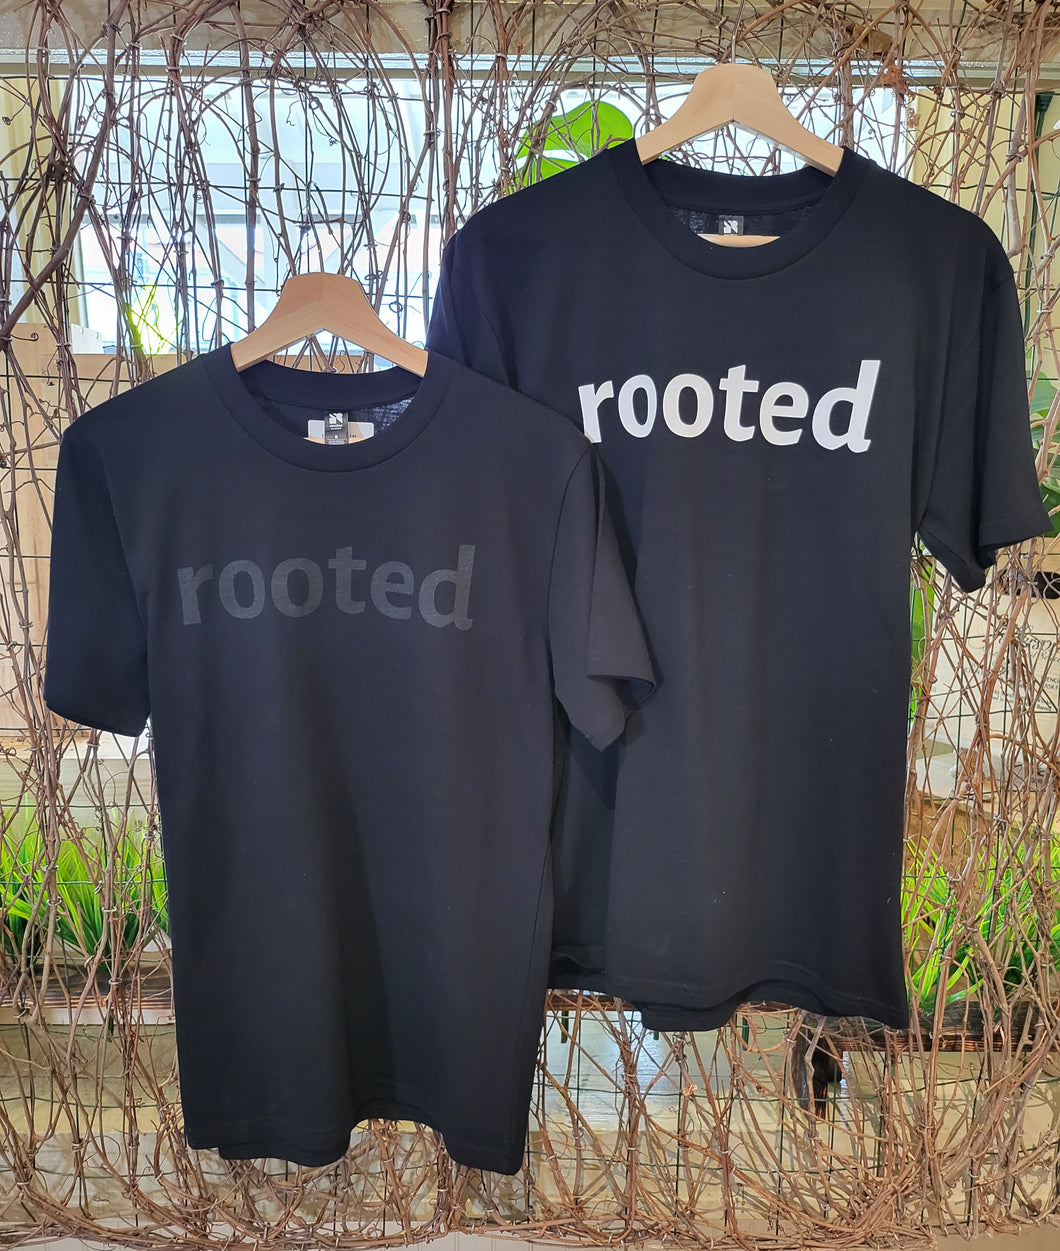 Rooted white letter t shirt - black